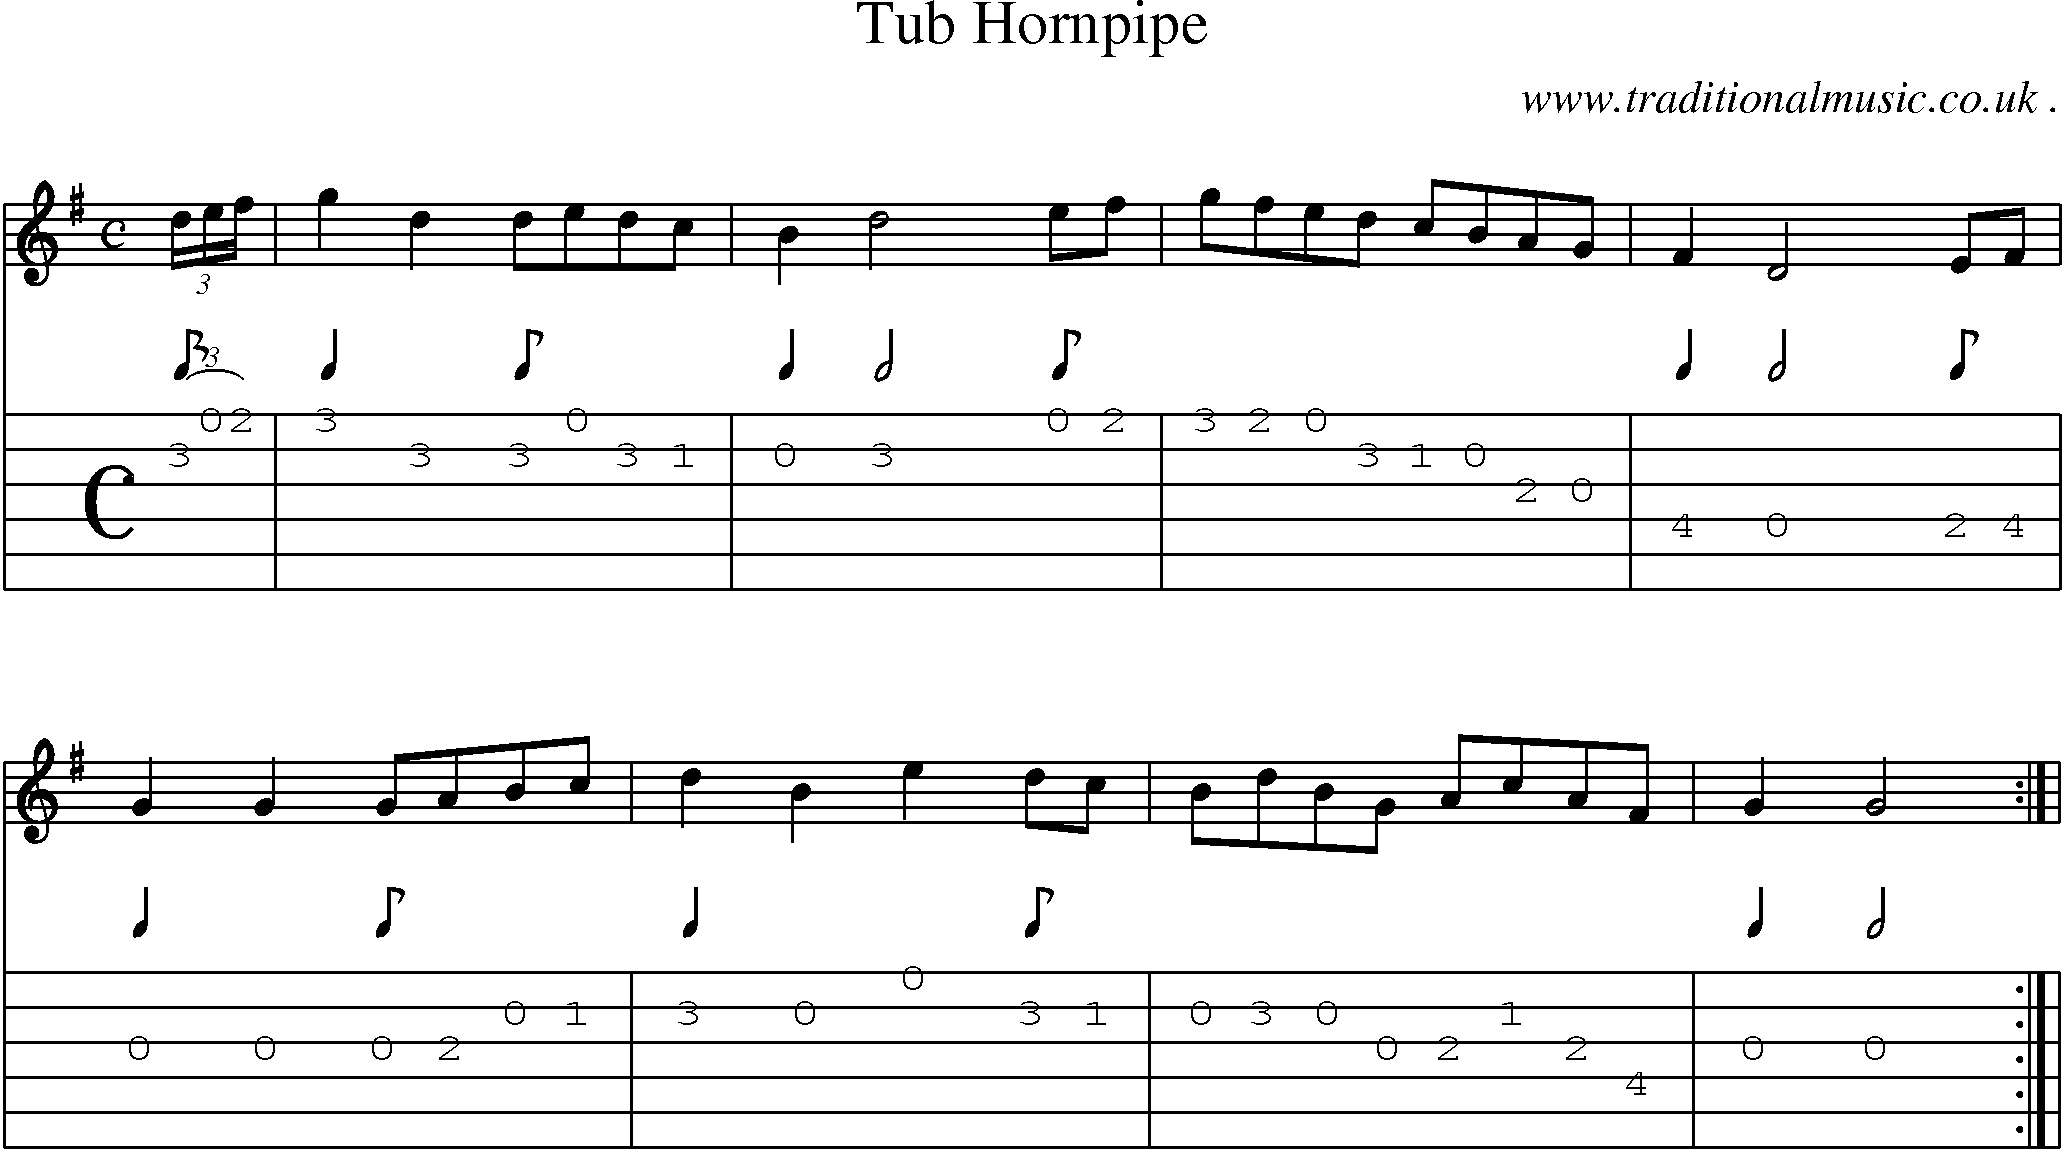 Sheet-Music and Guitar Tabs for Tub Hornpipe